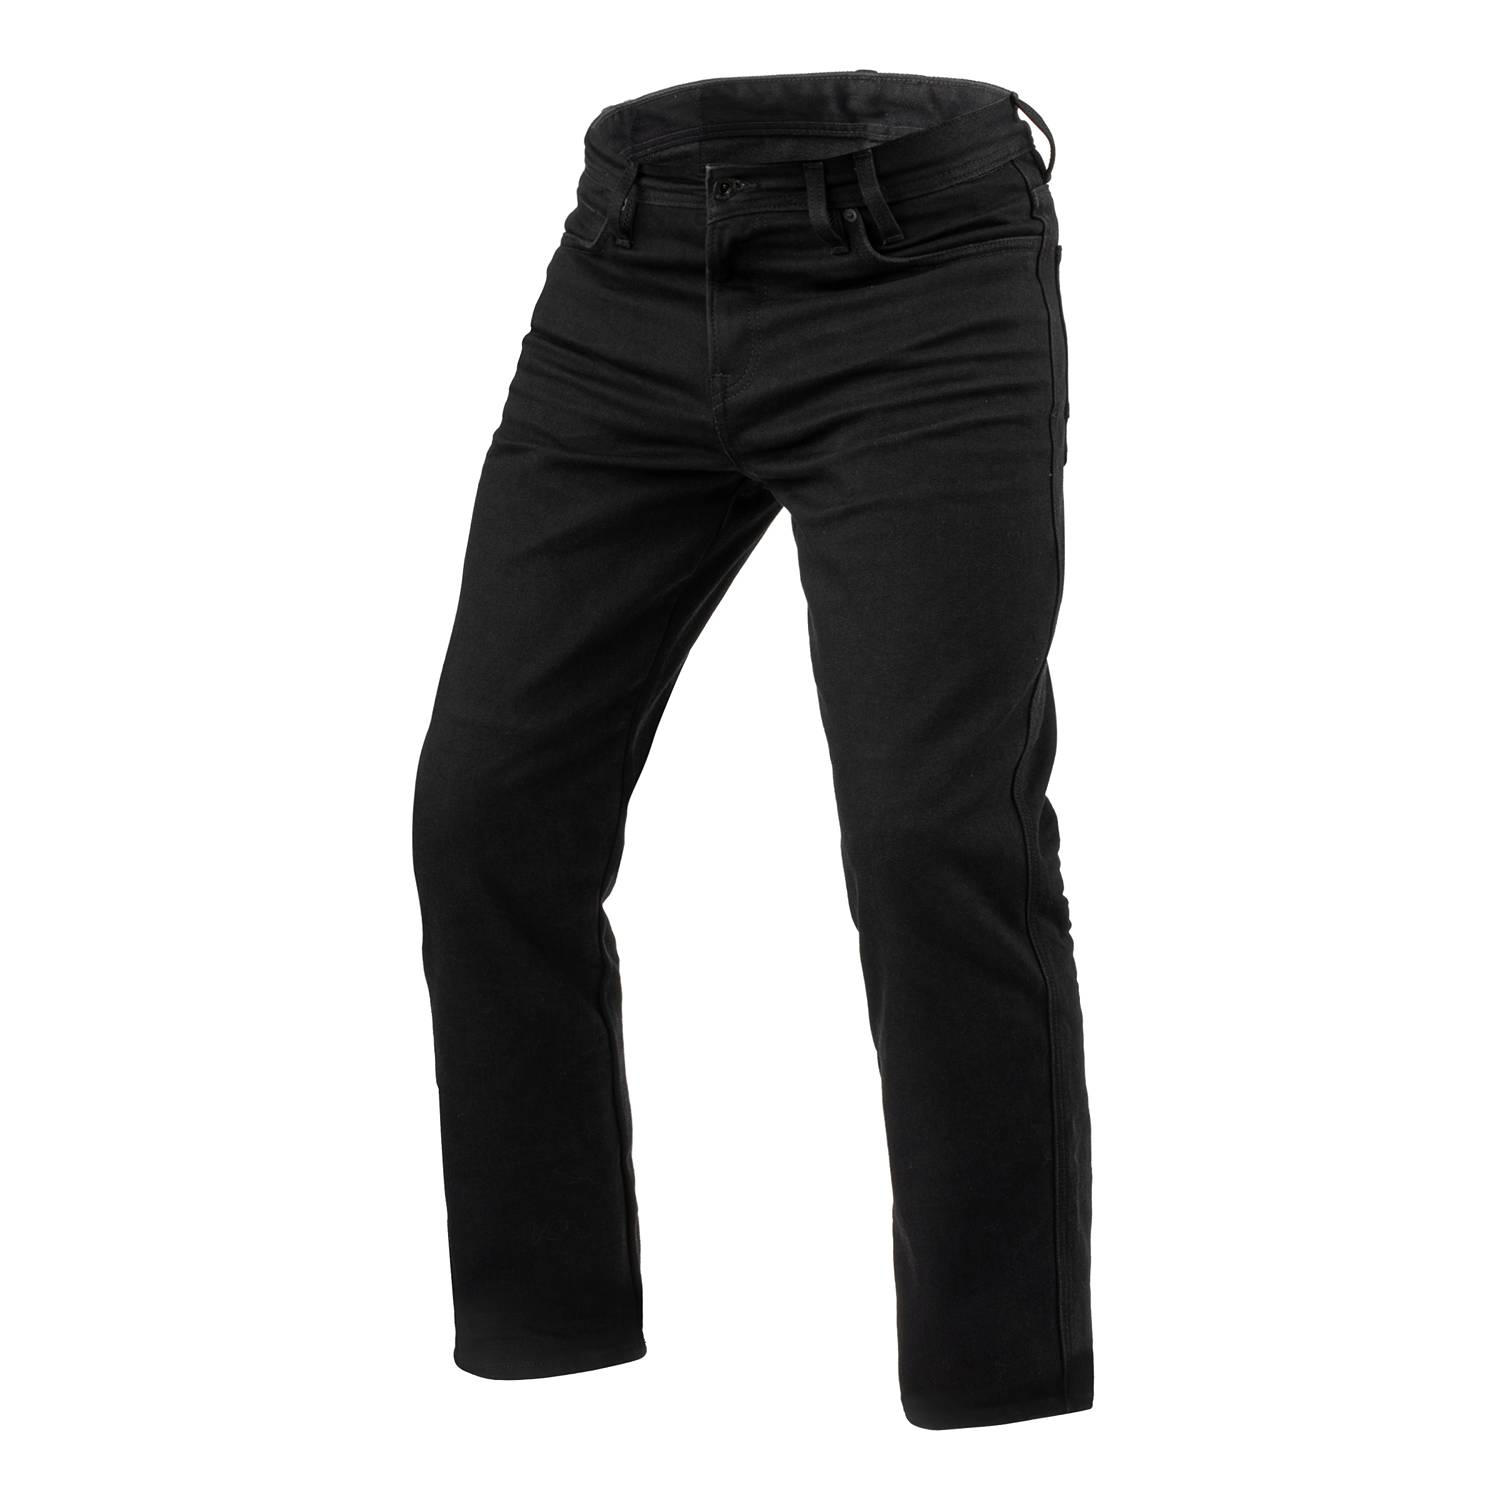 Image of REV'IT! Jeans Lombard 3 RF Black L36 Motorcycle Jeans Taille L36/W33